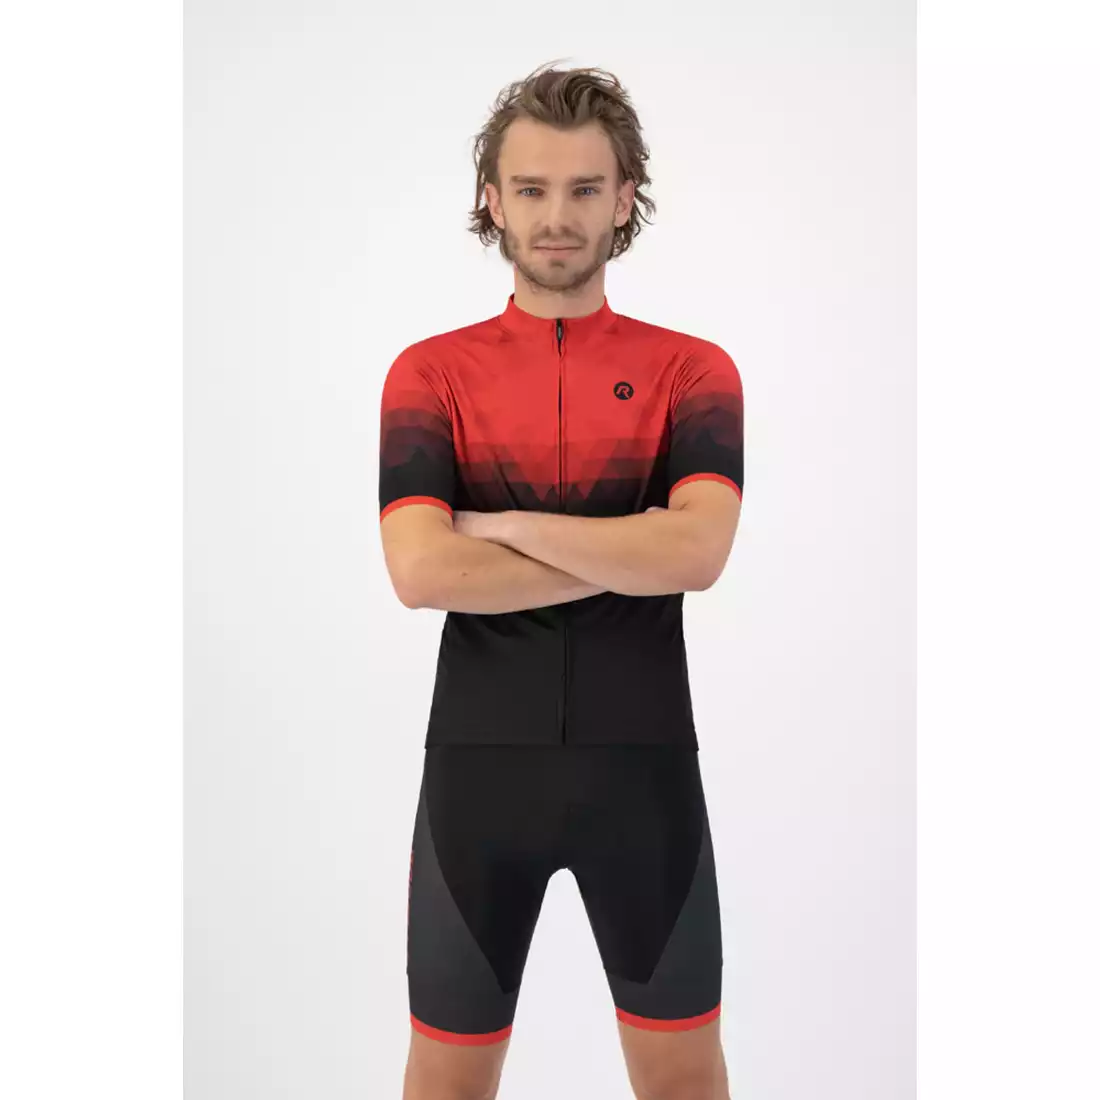 ROGELLI SPHERE Men's cycling jersey, black and red